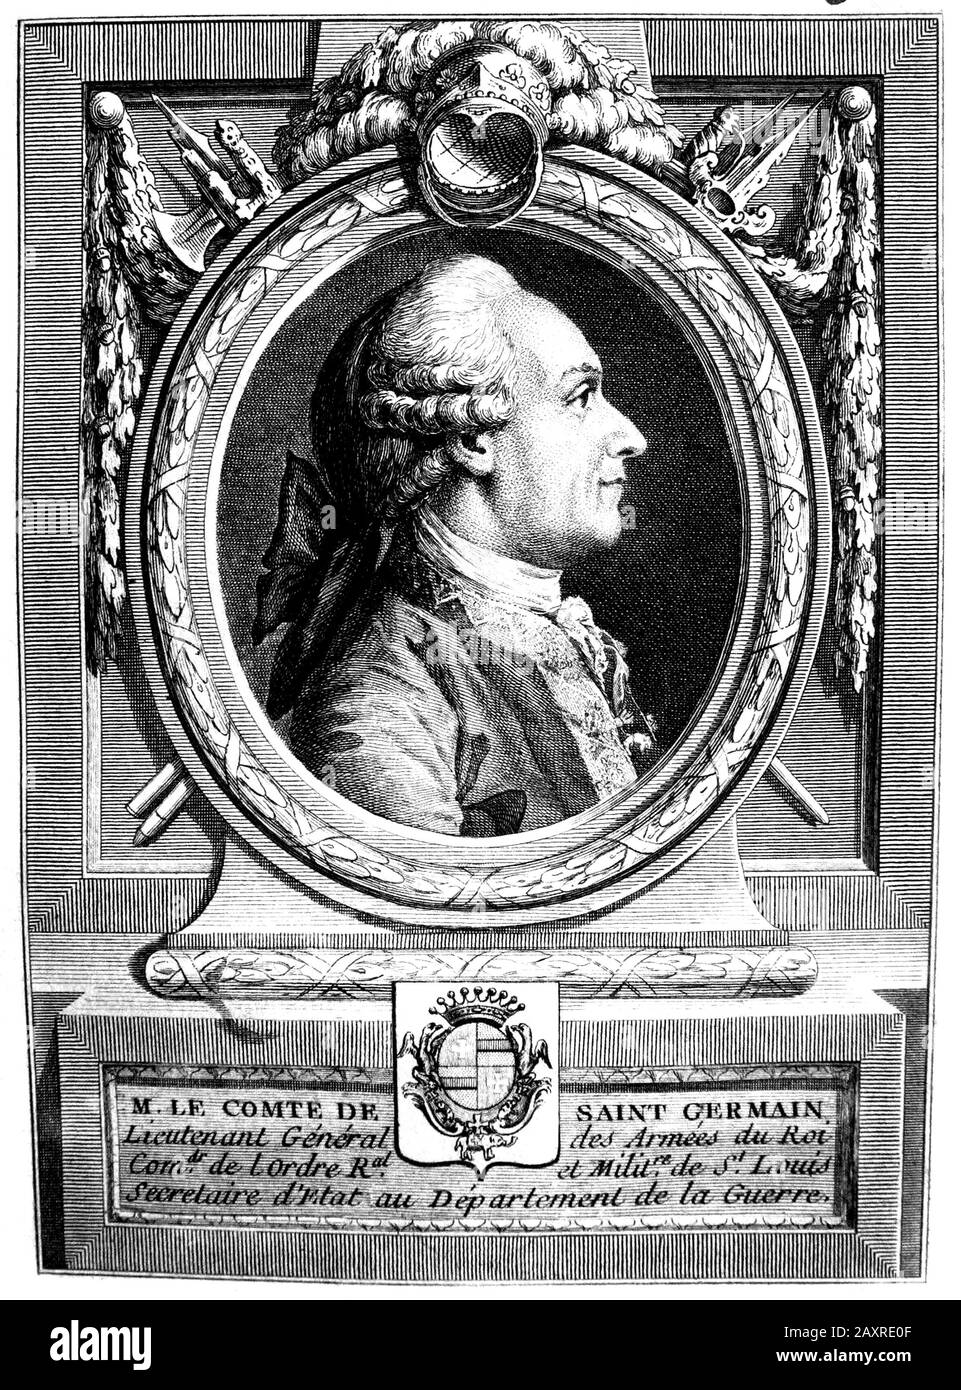 1750 ca, FRANCE : The mysterious french self-titled Count de SAINT GERMAIN ( 1710 ca - 1784 ), was a European adventurer, with an interest in Science , Alchemy and the Arts . - ALCHIMISTA - ALCHIMIA - ALCHIMISMO - Conte - Elisir di lunga vita - OCCULTO - OCCULTISTA - OCCULTISMO - OCCULT - OCCULTISM - MISTERO - MYSTERY - HISTORY - FOTO STORICHE - Magia - Magic - MAGO - portait - ritratto - engraving - incisione - parrucca - wig - apolide - apolid - Comte de  - Conte di --- ARCHIVIO GBB Stock Photo